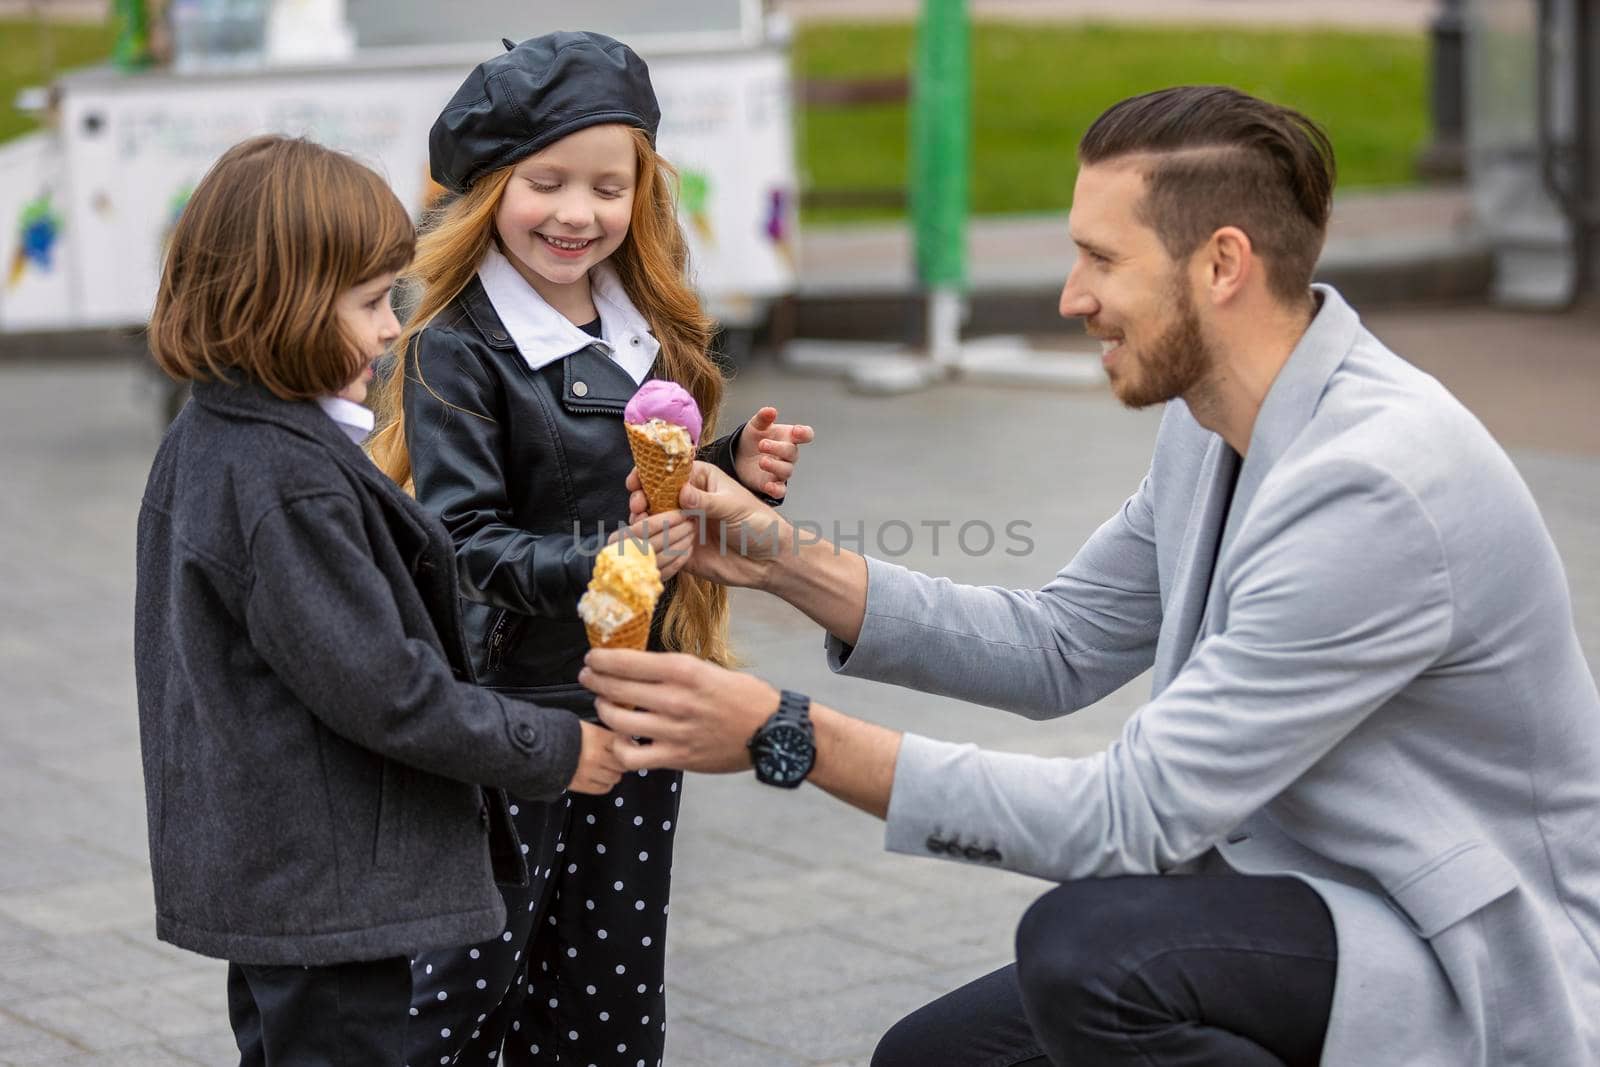 Man gives ice cream to children by zokov